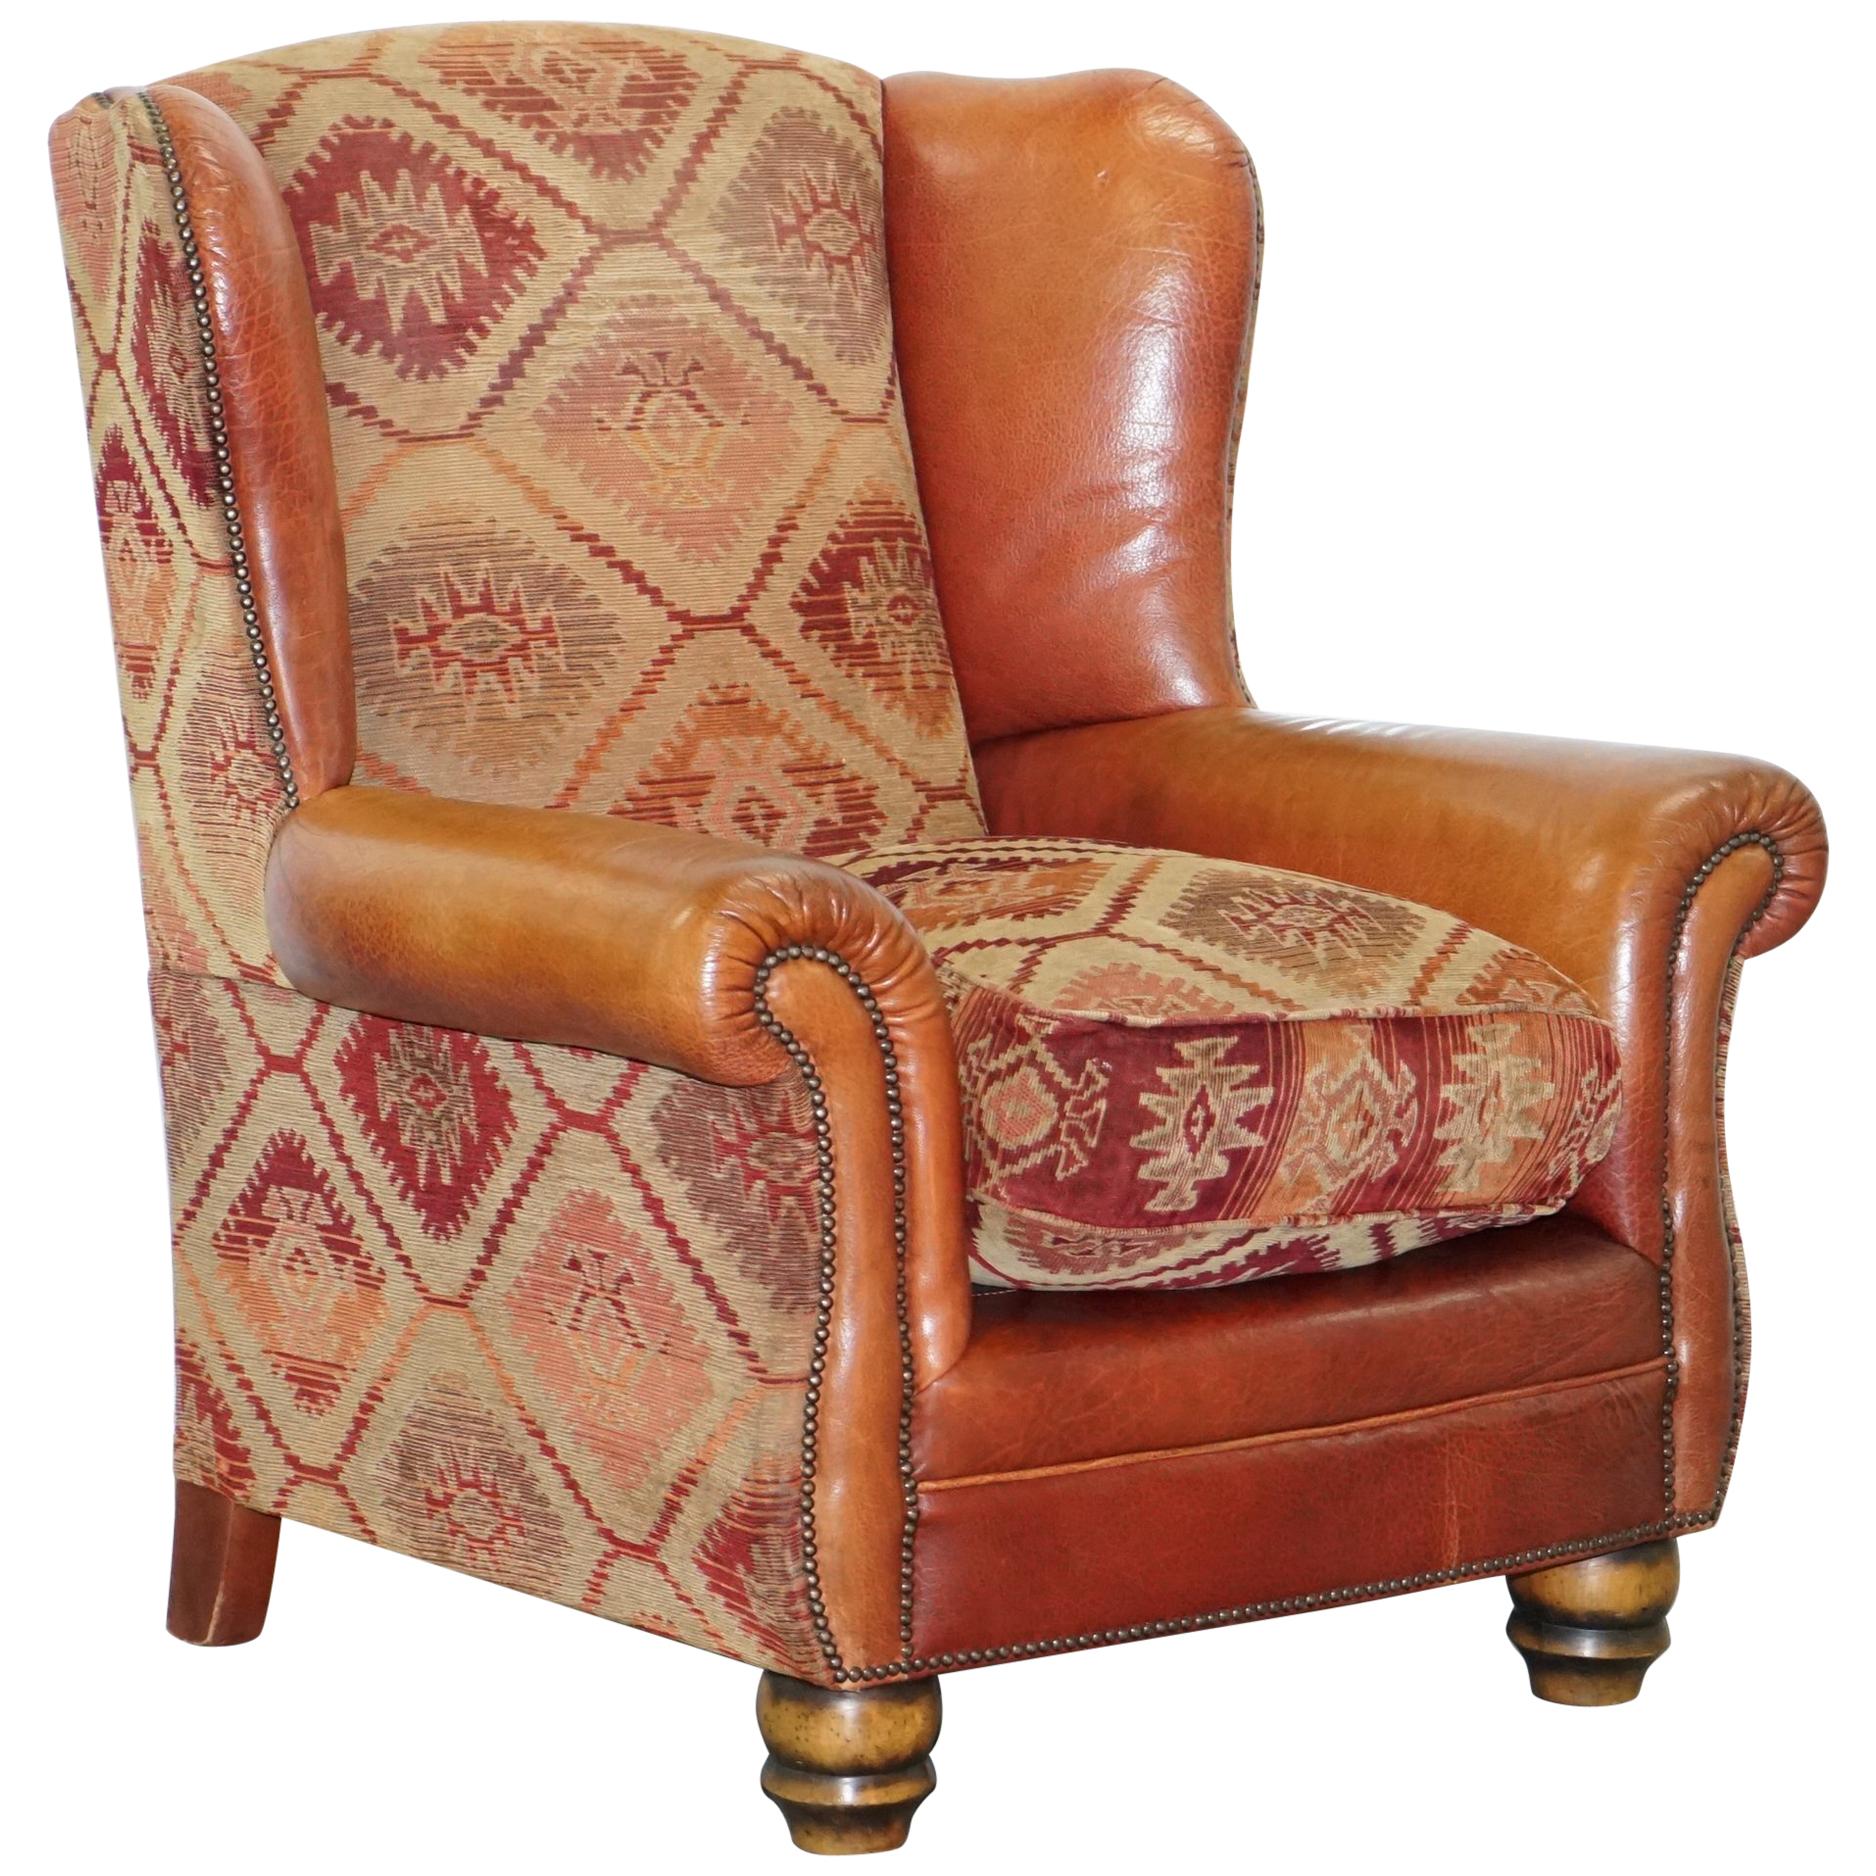 Tetrad Eastwood Brown Leather and Kilim Upholstery Armchair Lovely